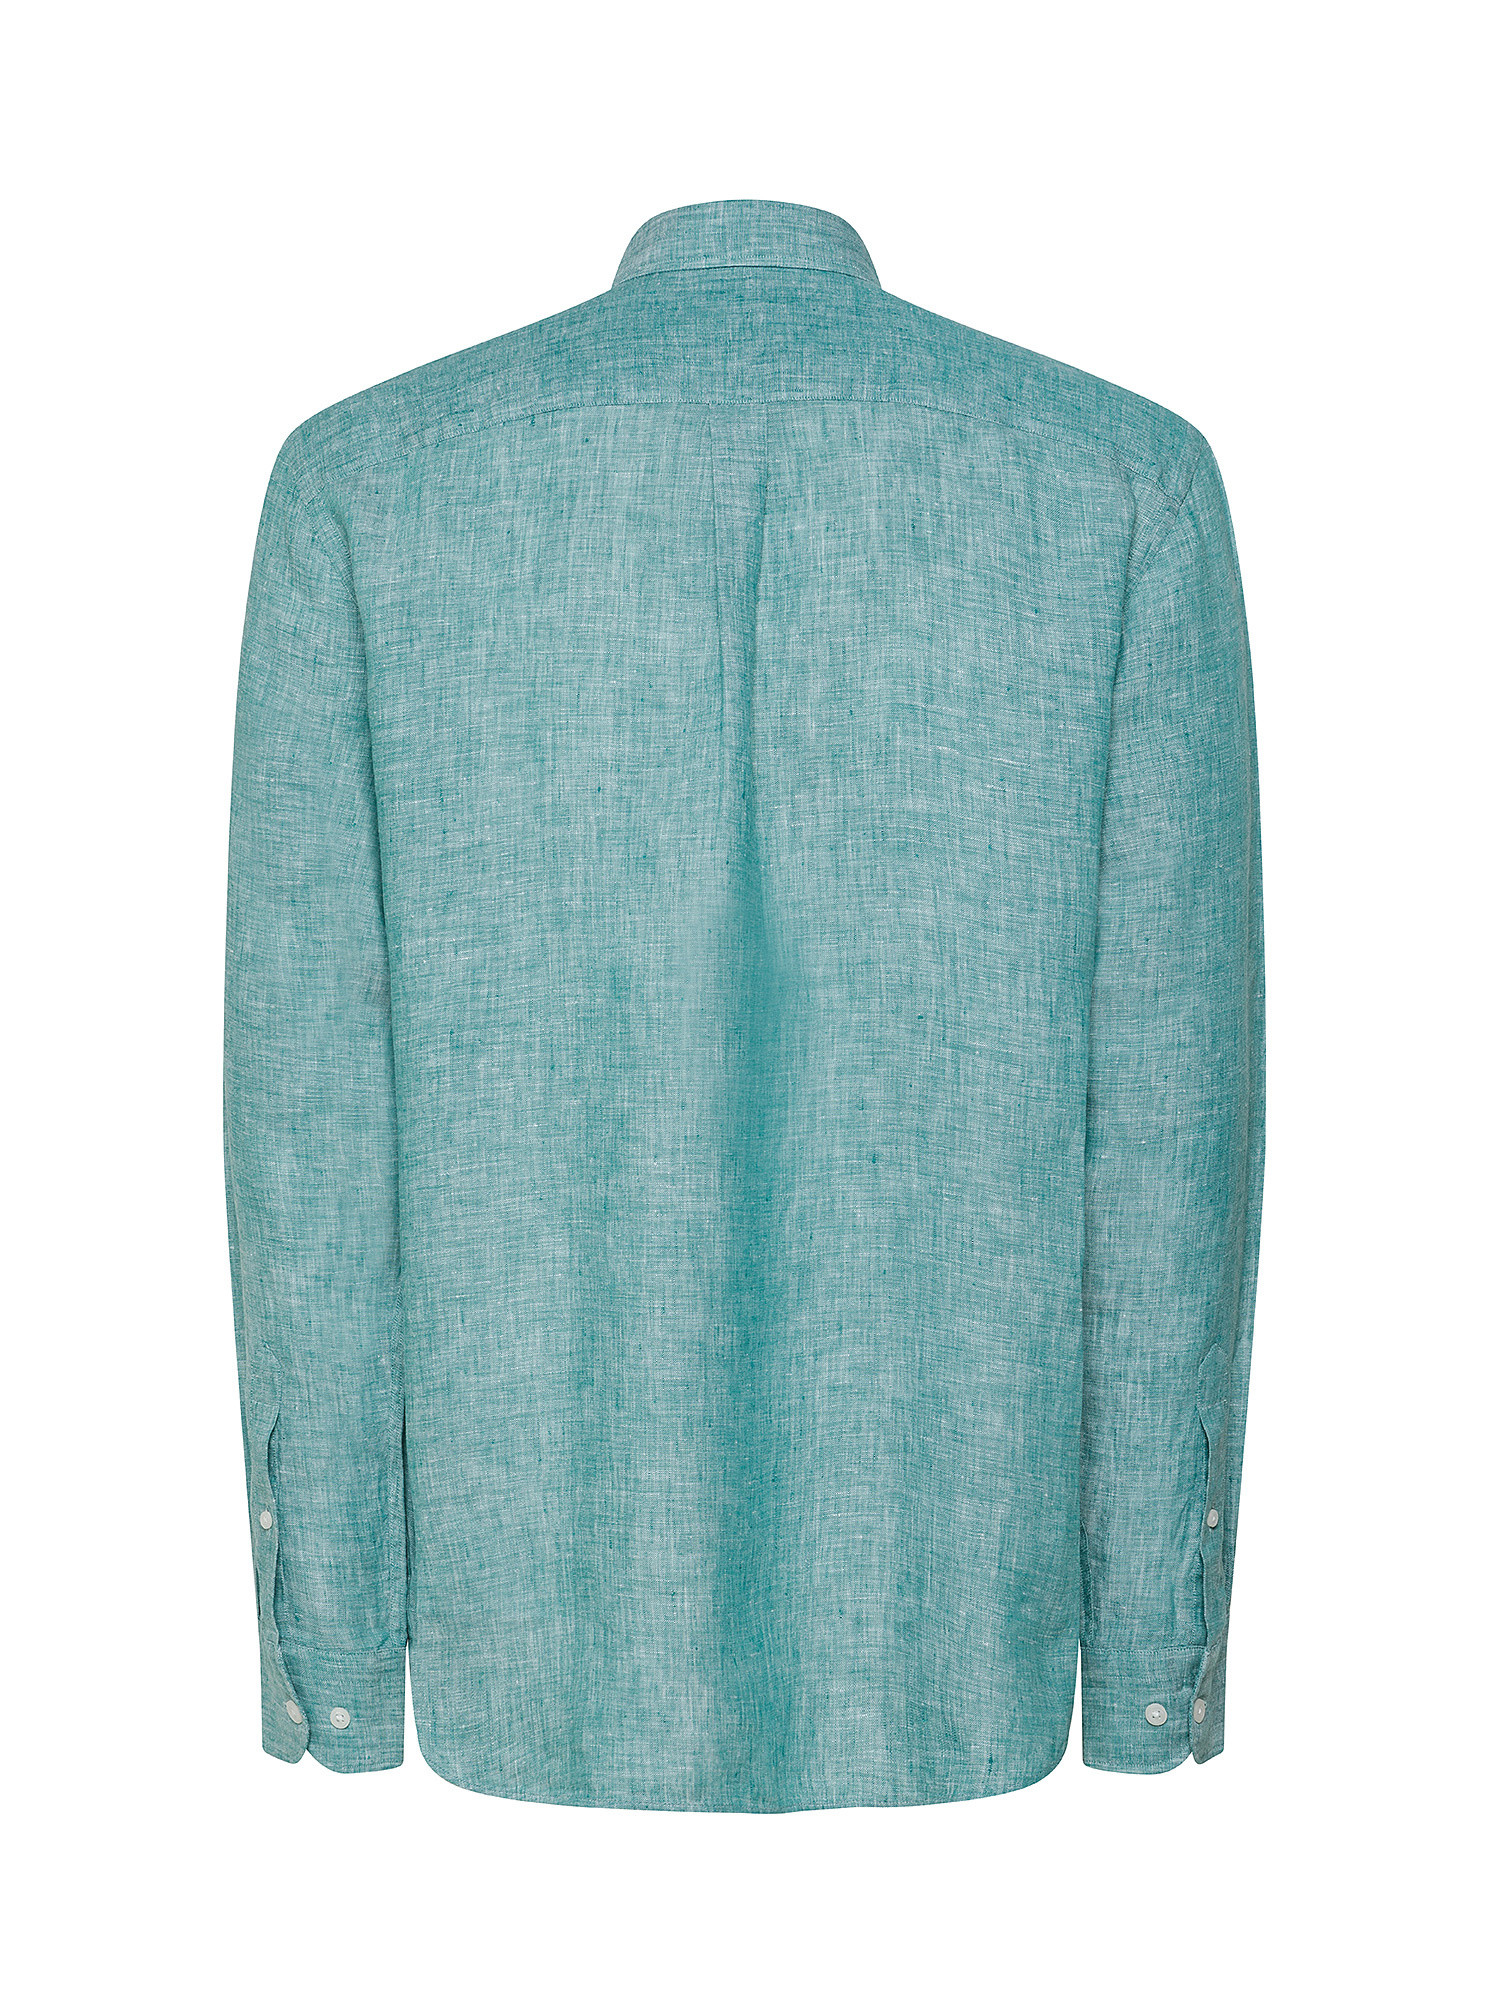 Luca D'Altieri - Tailor fit shirt in pure linen, Emerald, large image number 1